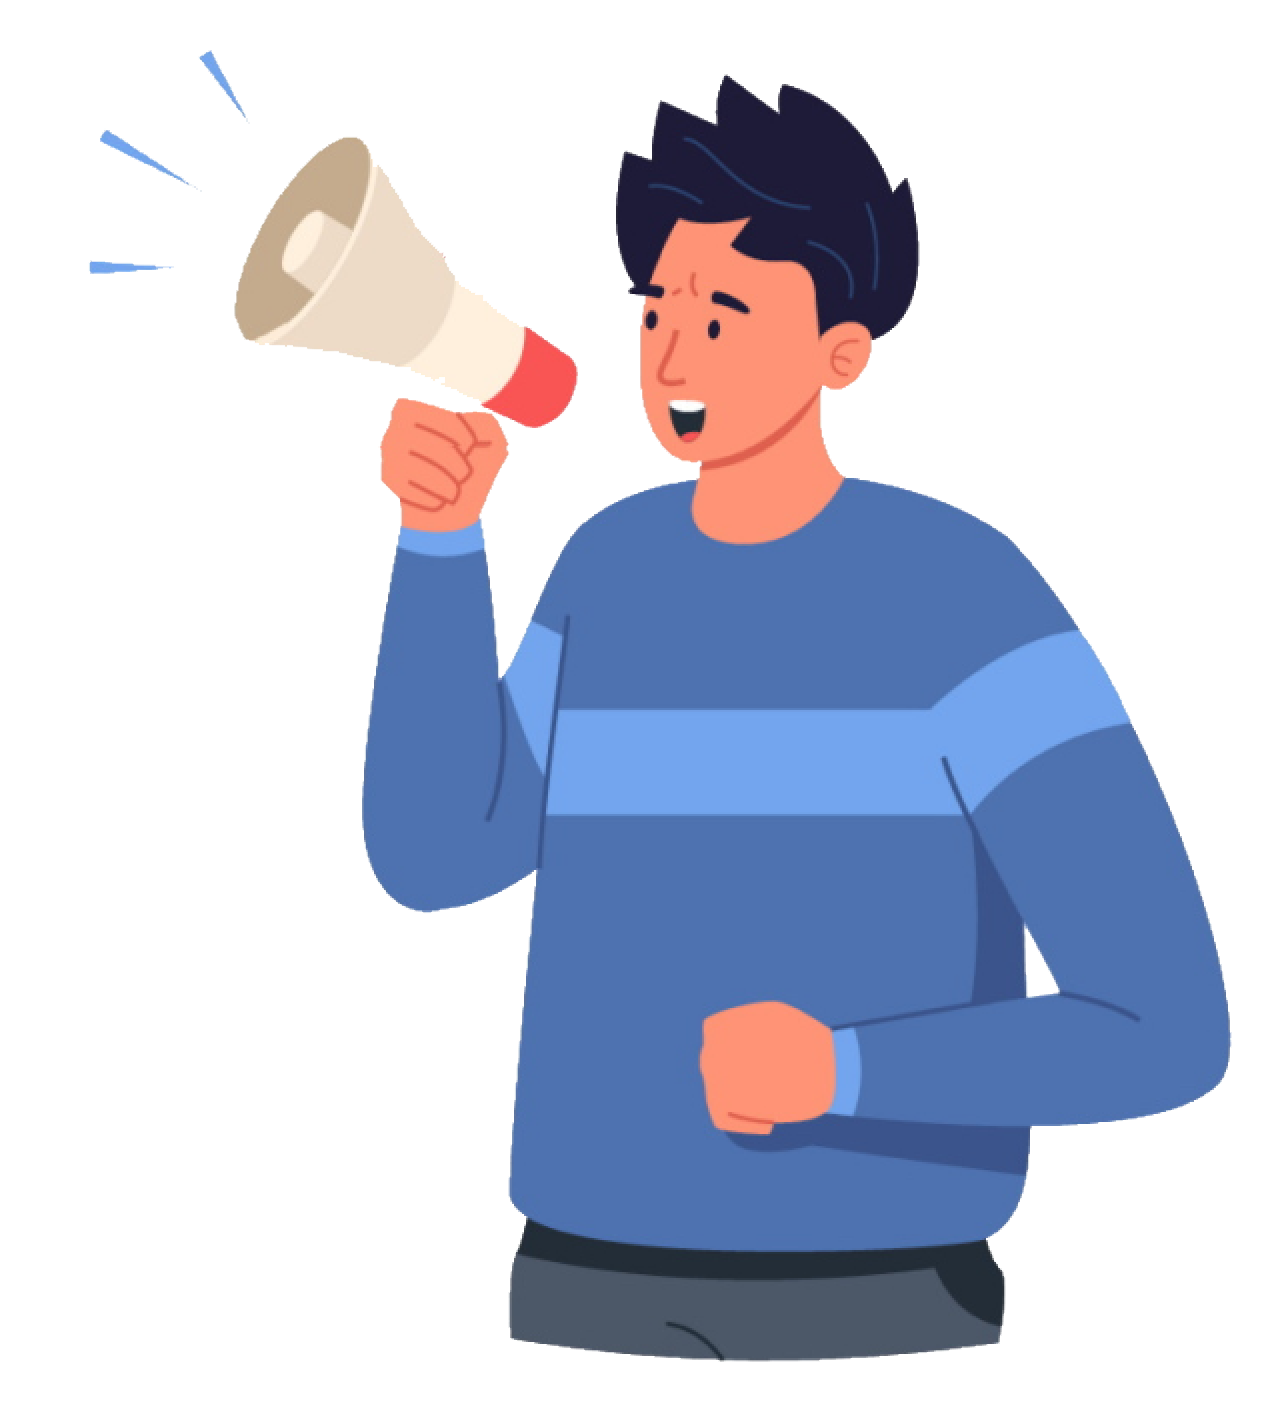 vector stock image of Protestor activist style